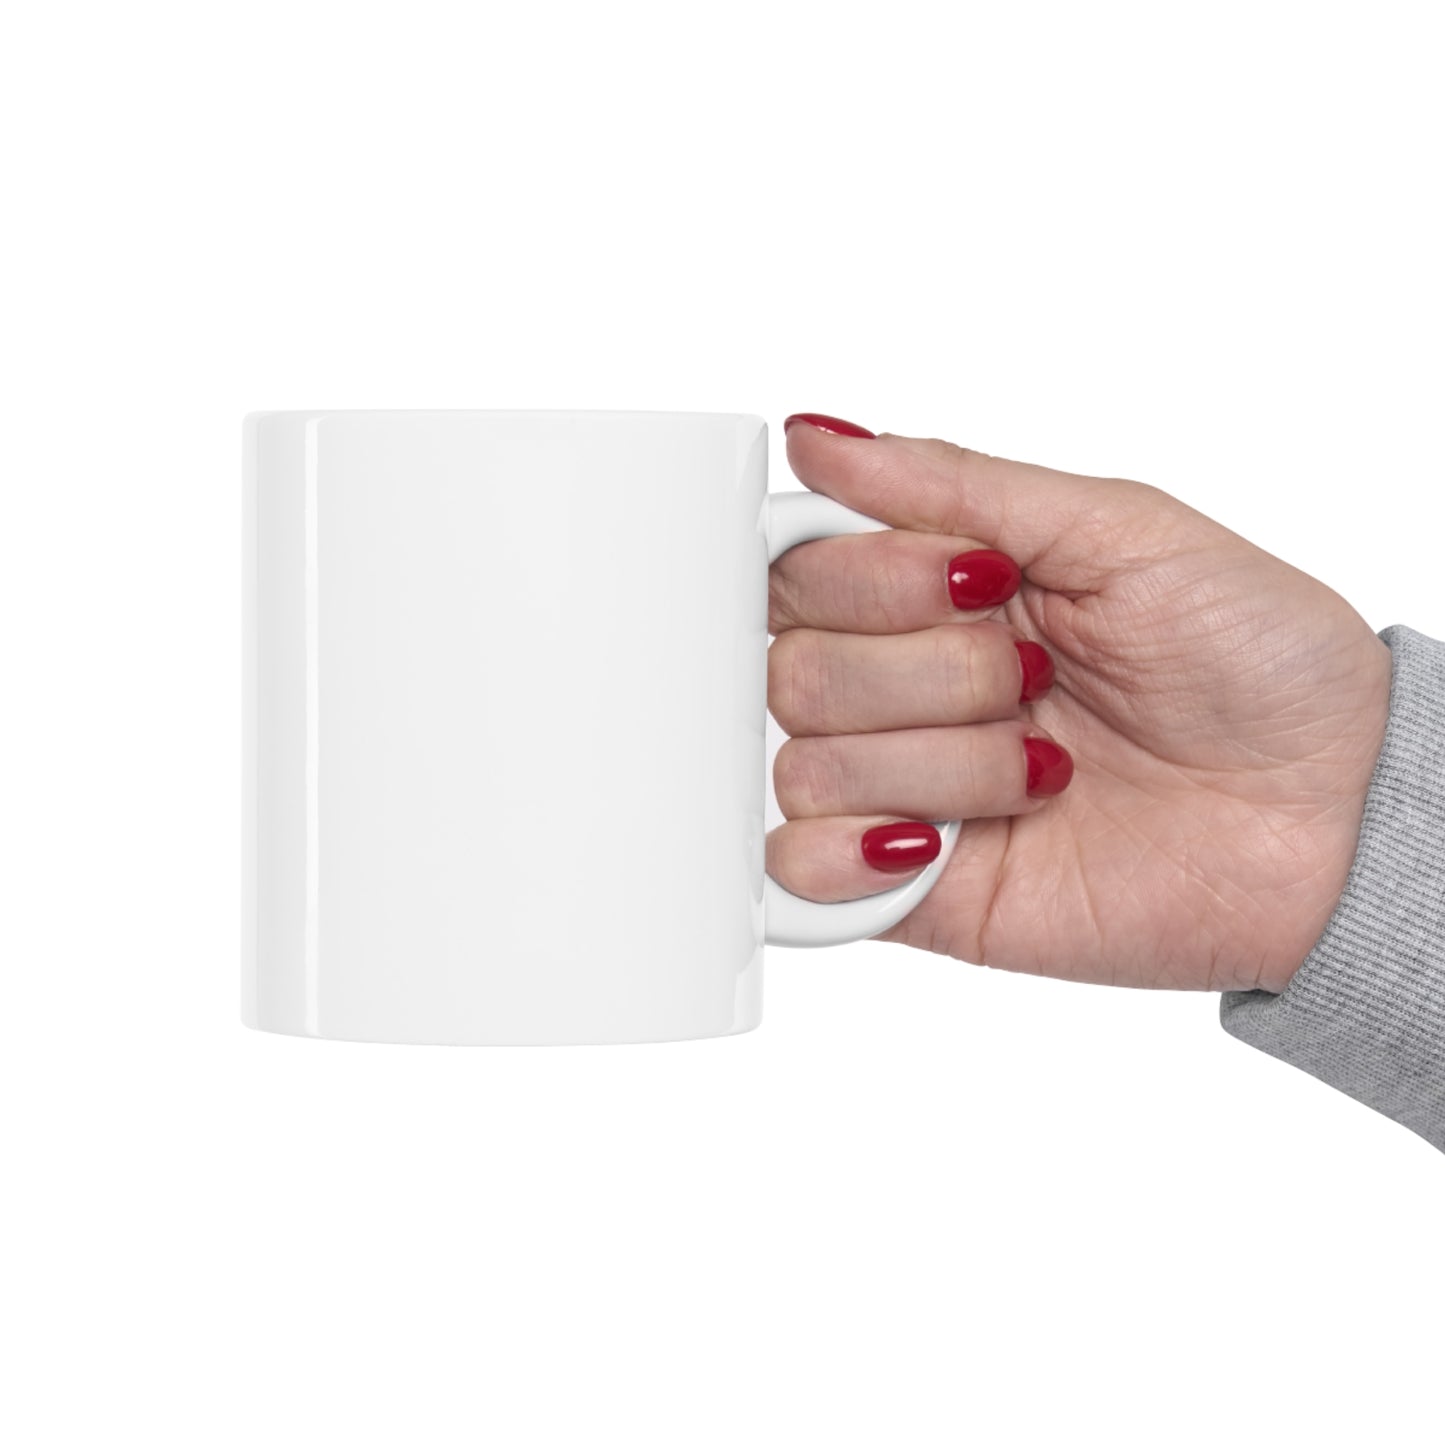 "I May Be Wrong, But I Doubt It" Coffee Mug - Weave Got Gifts - Unique Gifts You Won’t Find Anywhere Else!